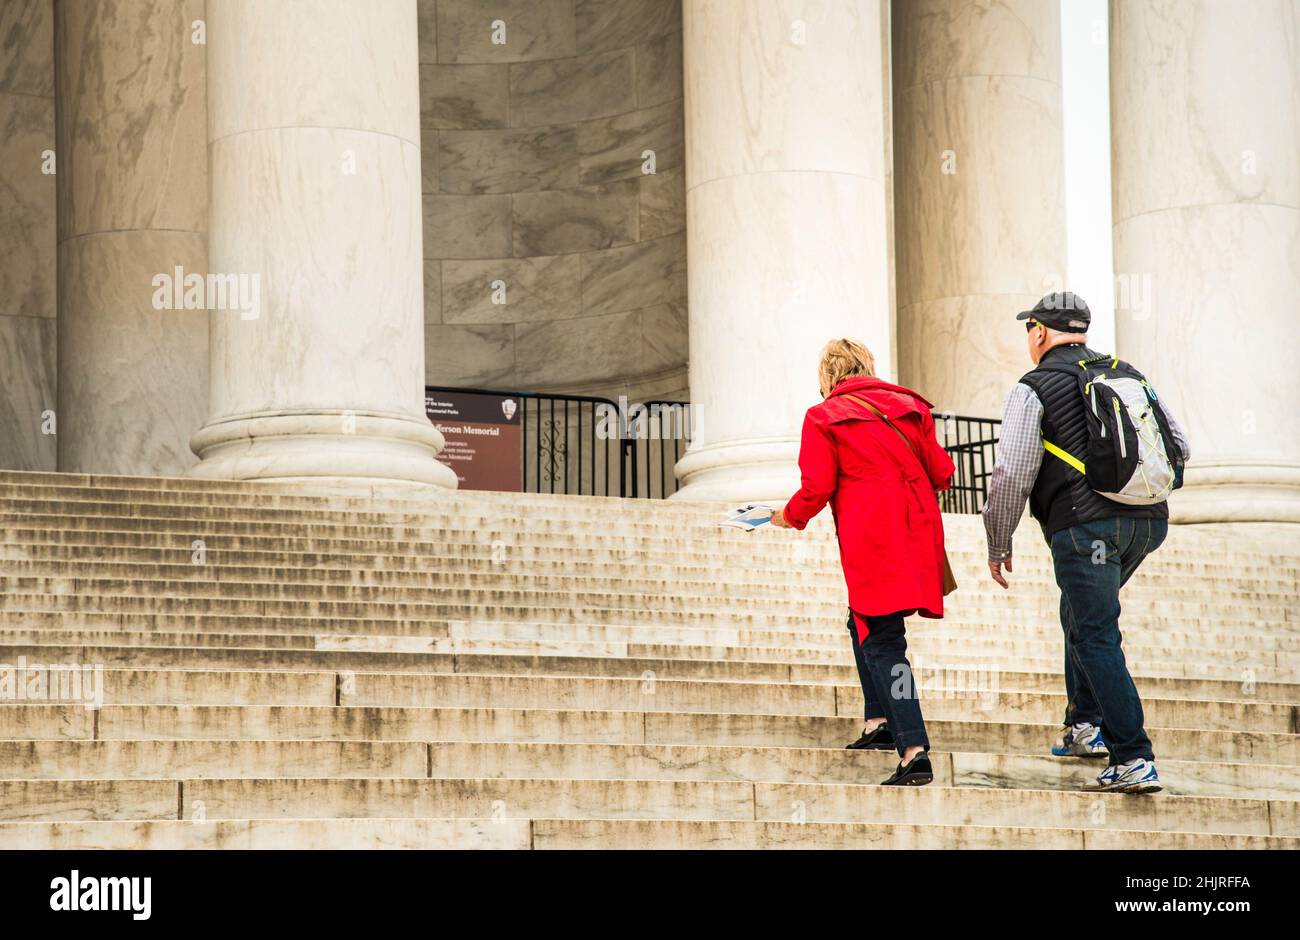 Couple walking up cement steps with columns Stock Photo